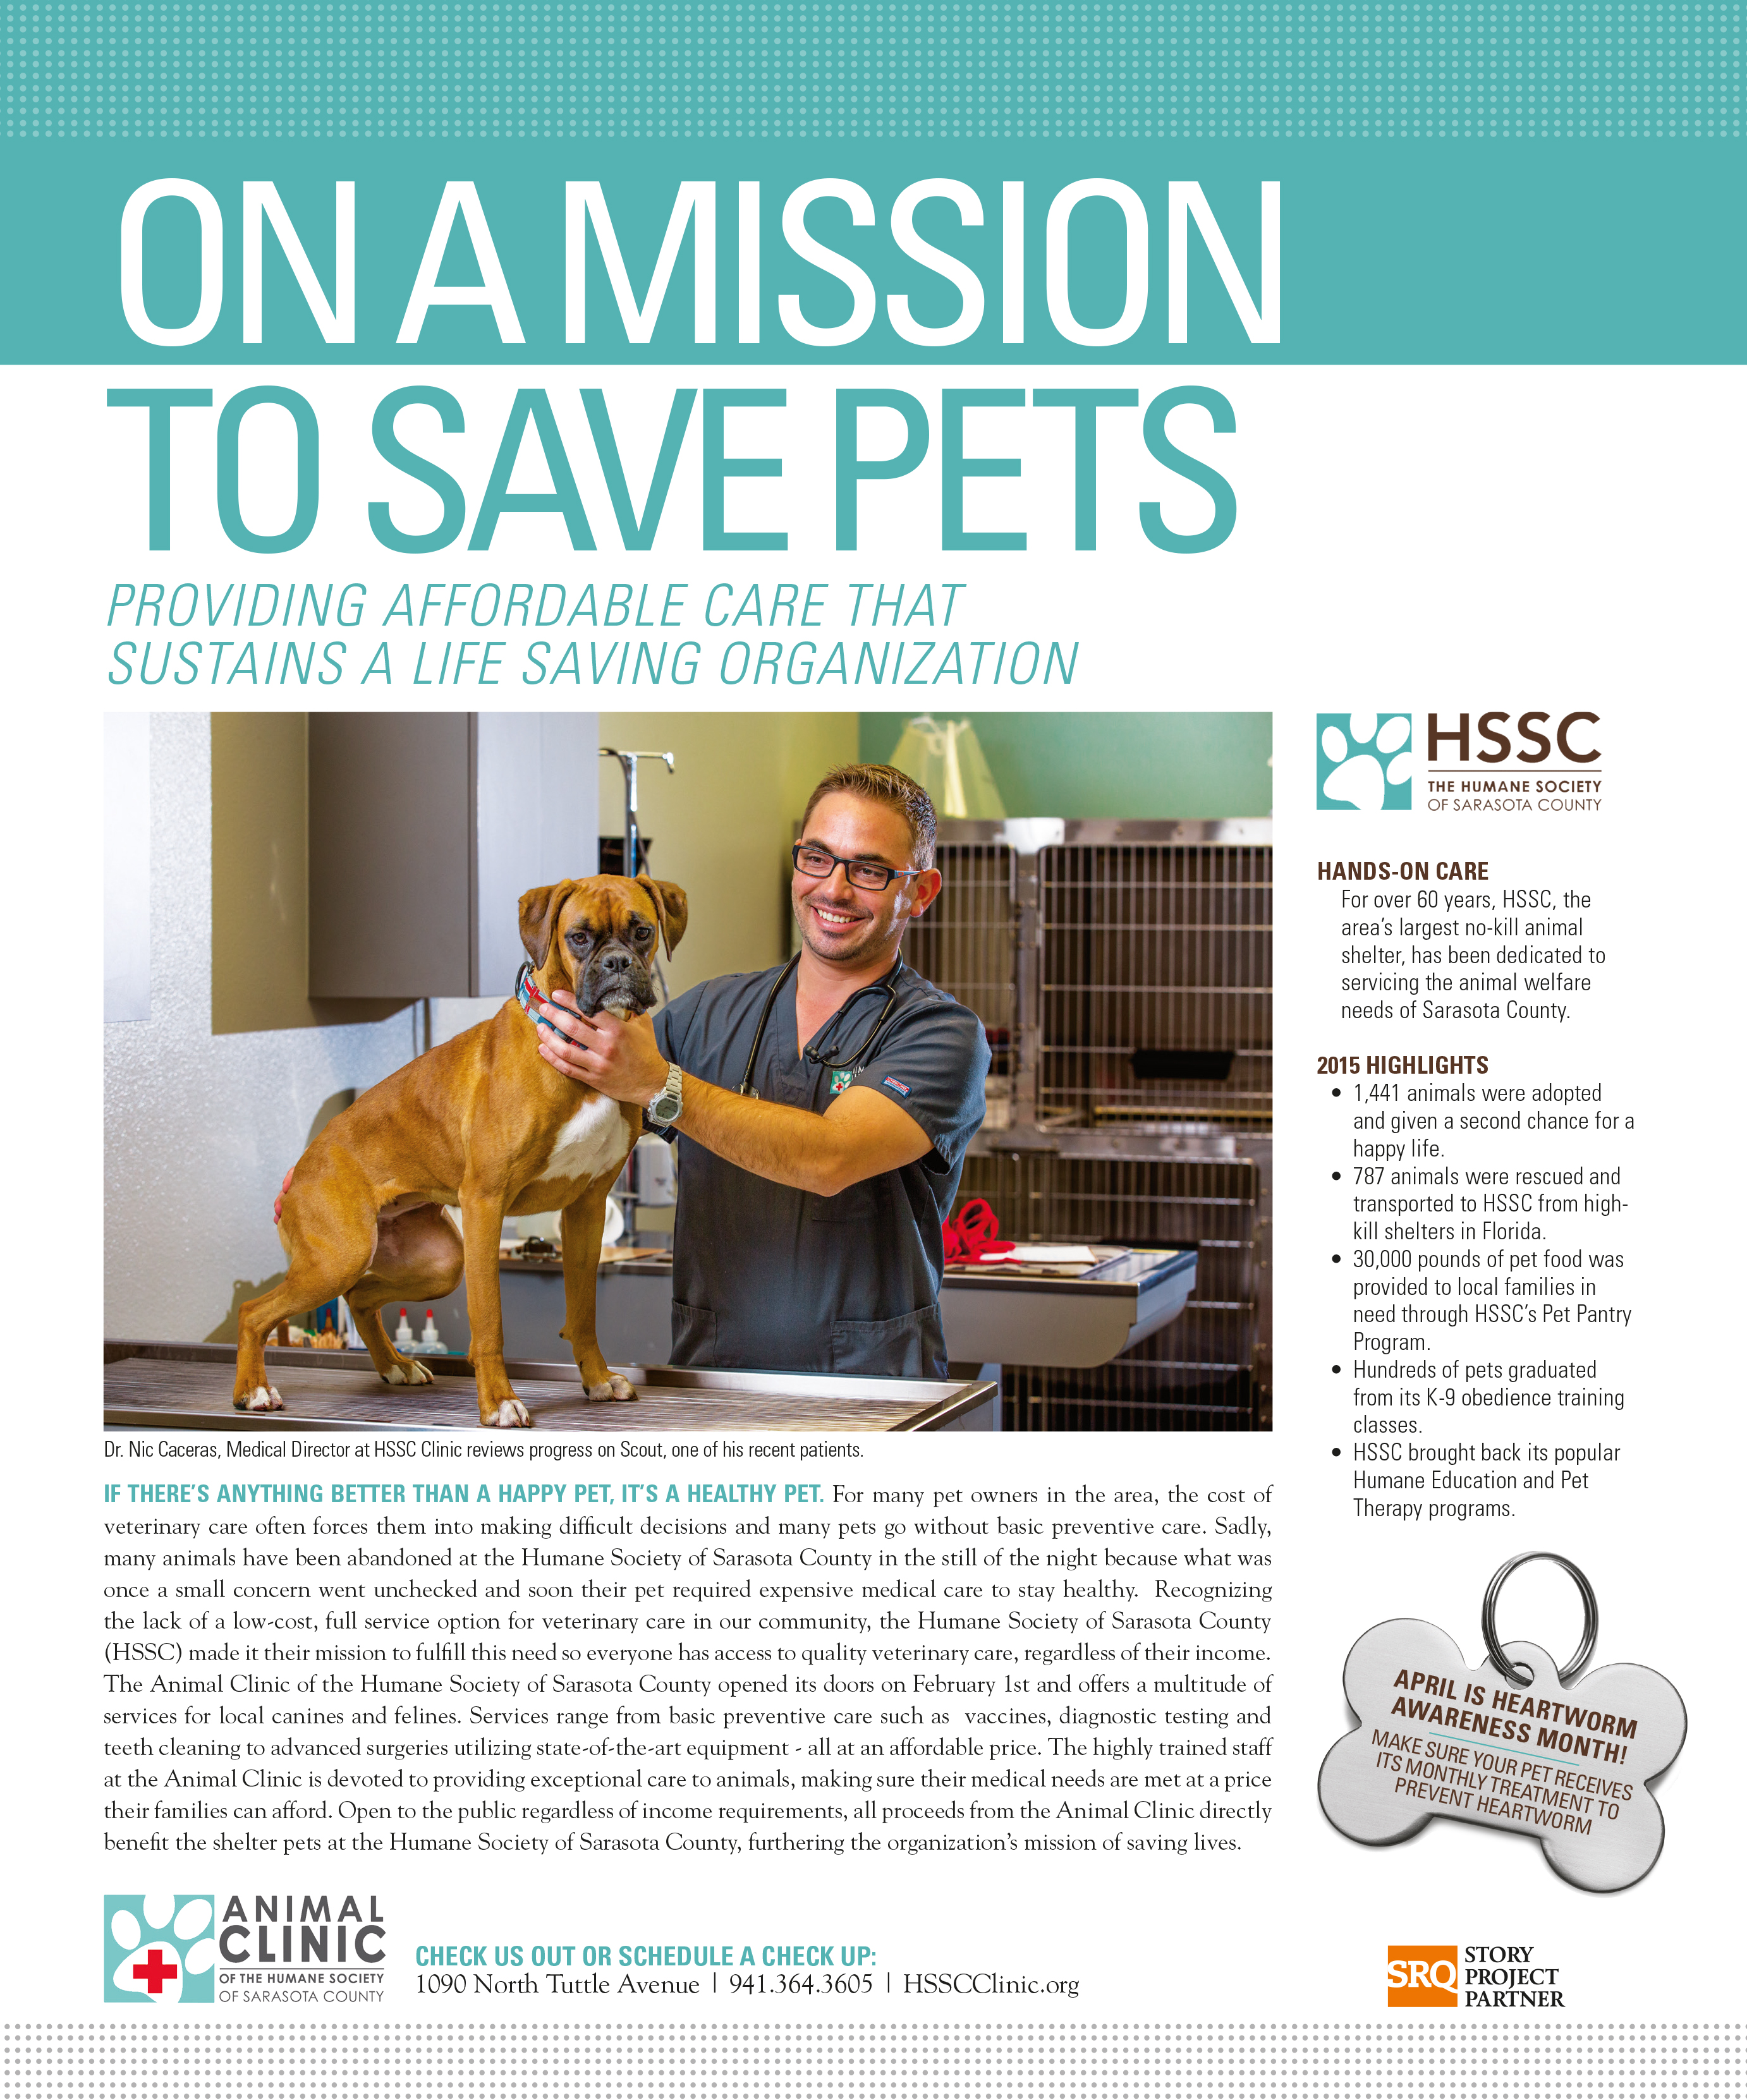 On a Mission to Save Pets